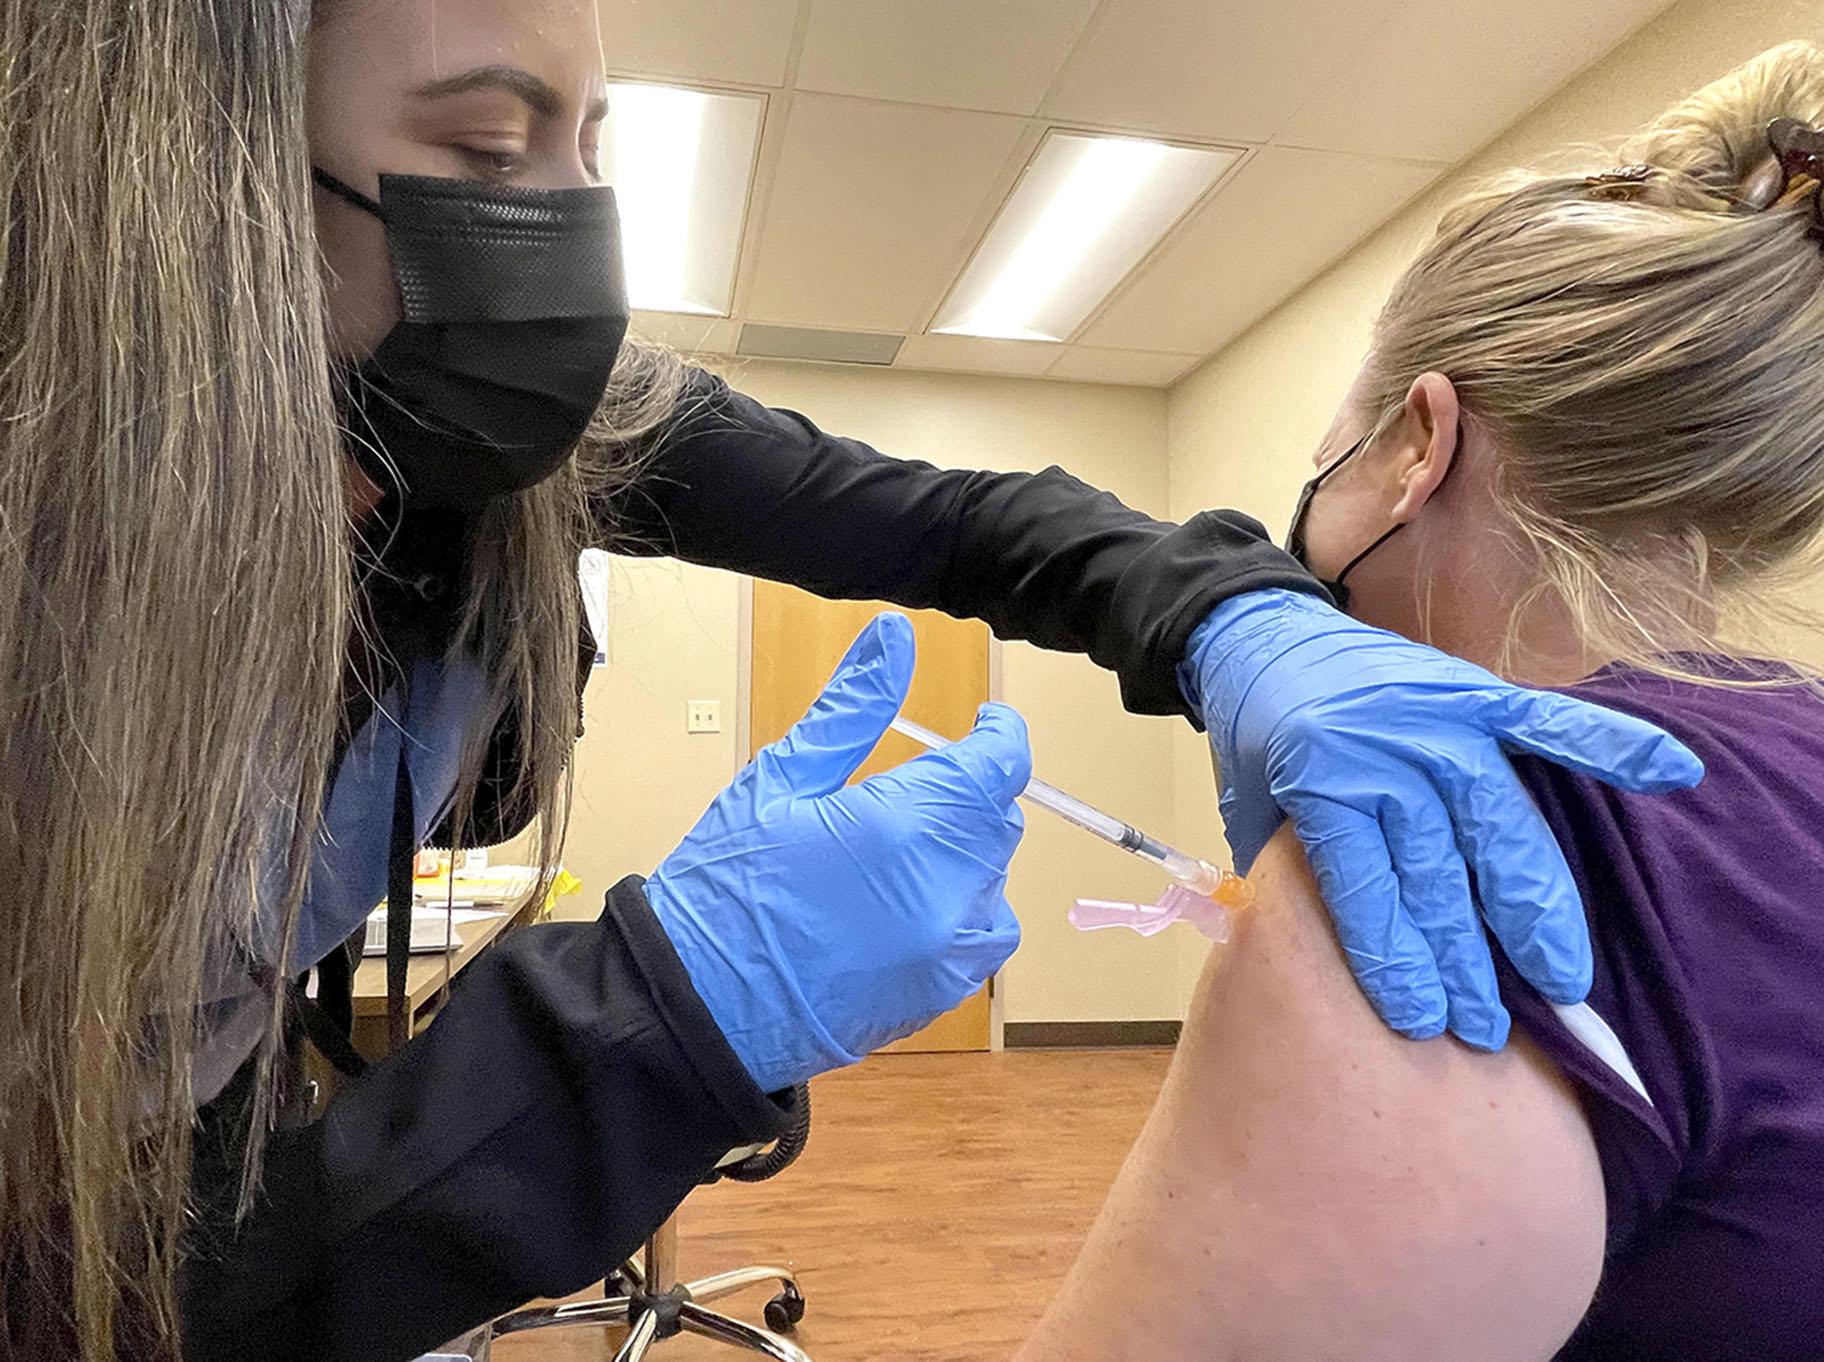 Nurse Jennifer Ulloa administers a COVID-19 vaccine Tuesday, July 27, 2021, at the county’s vaccination clinic in Whispering Pines, Calif. (Elias Funez / The Union via AP)